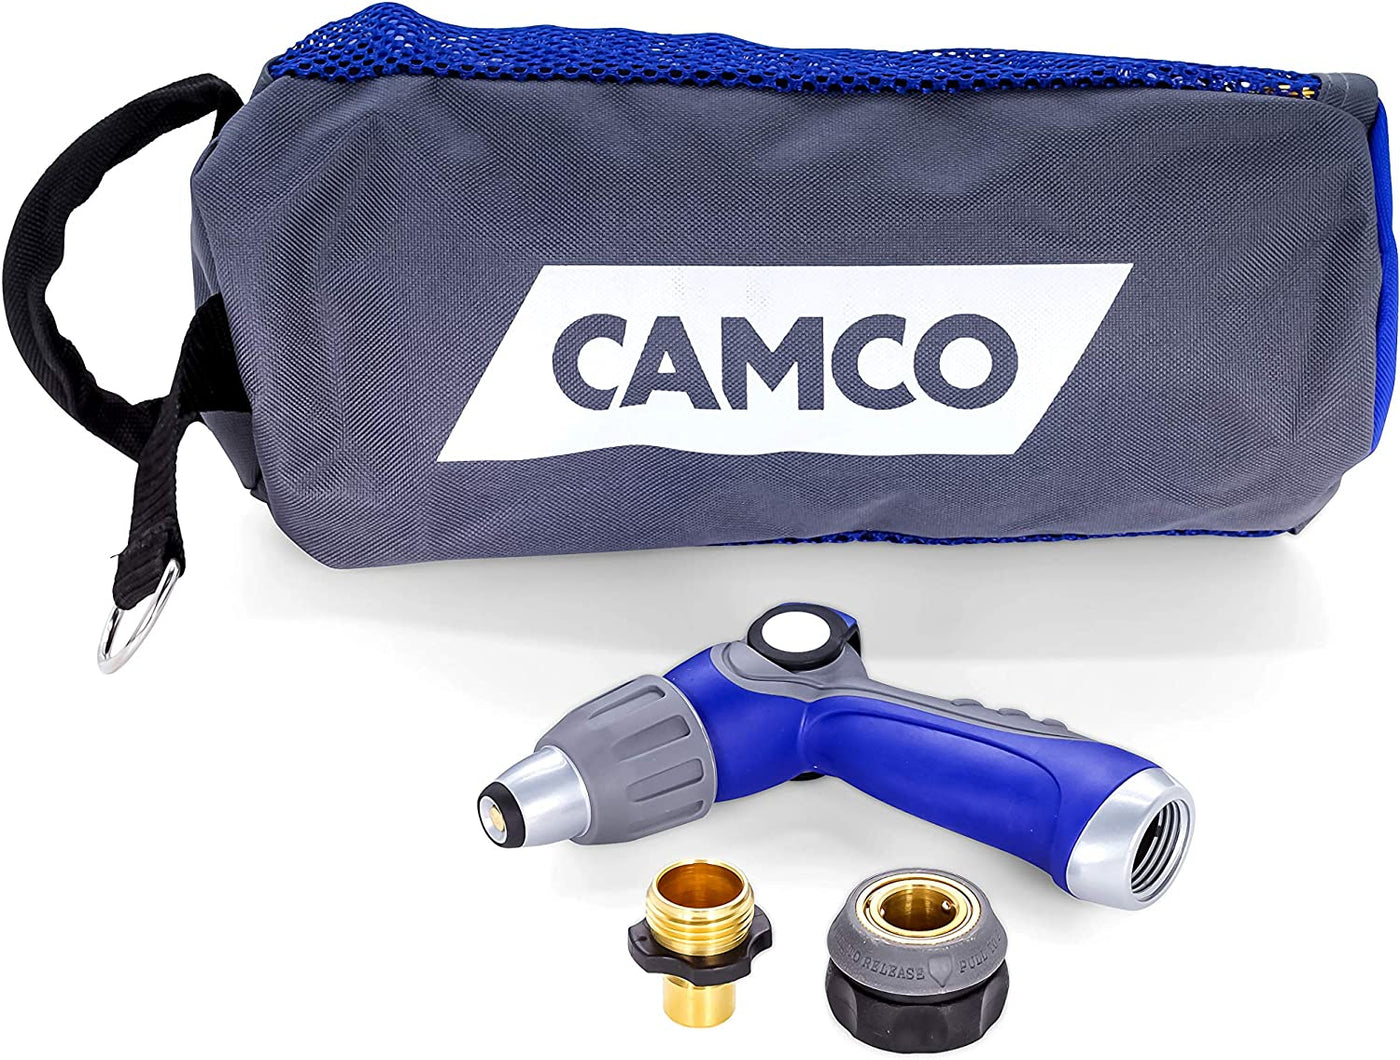 Camco 41980 20-Foot Coiled Hose and Spray Nozzle Kit